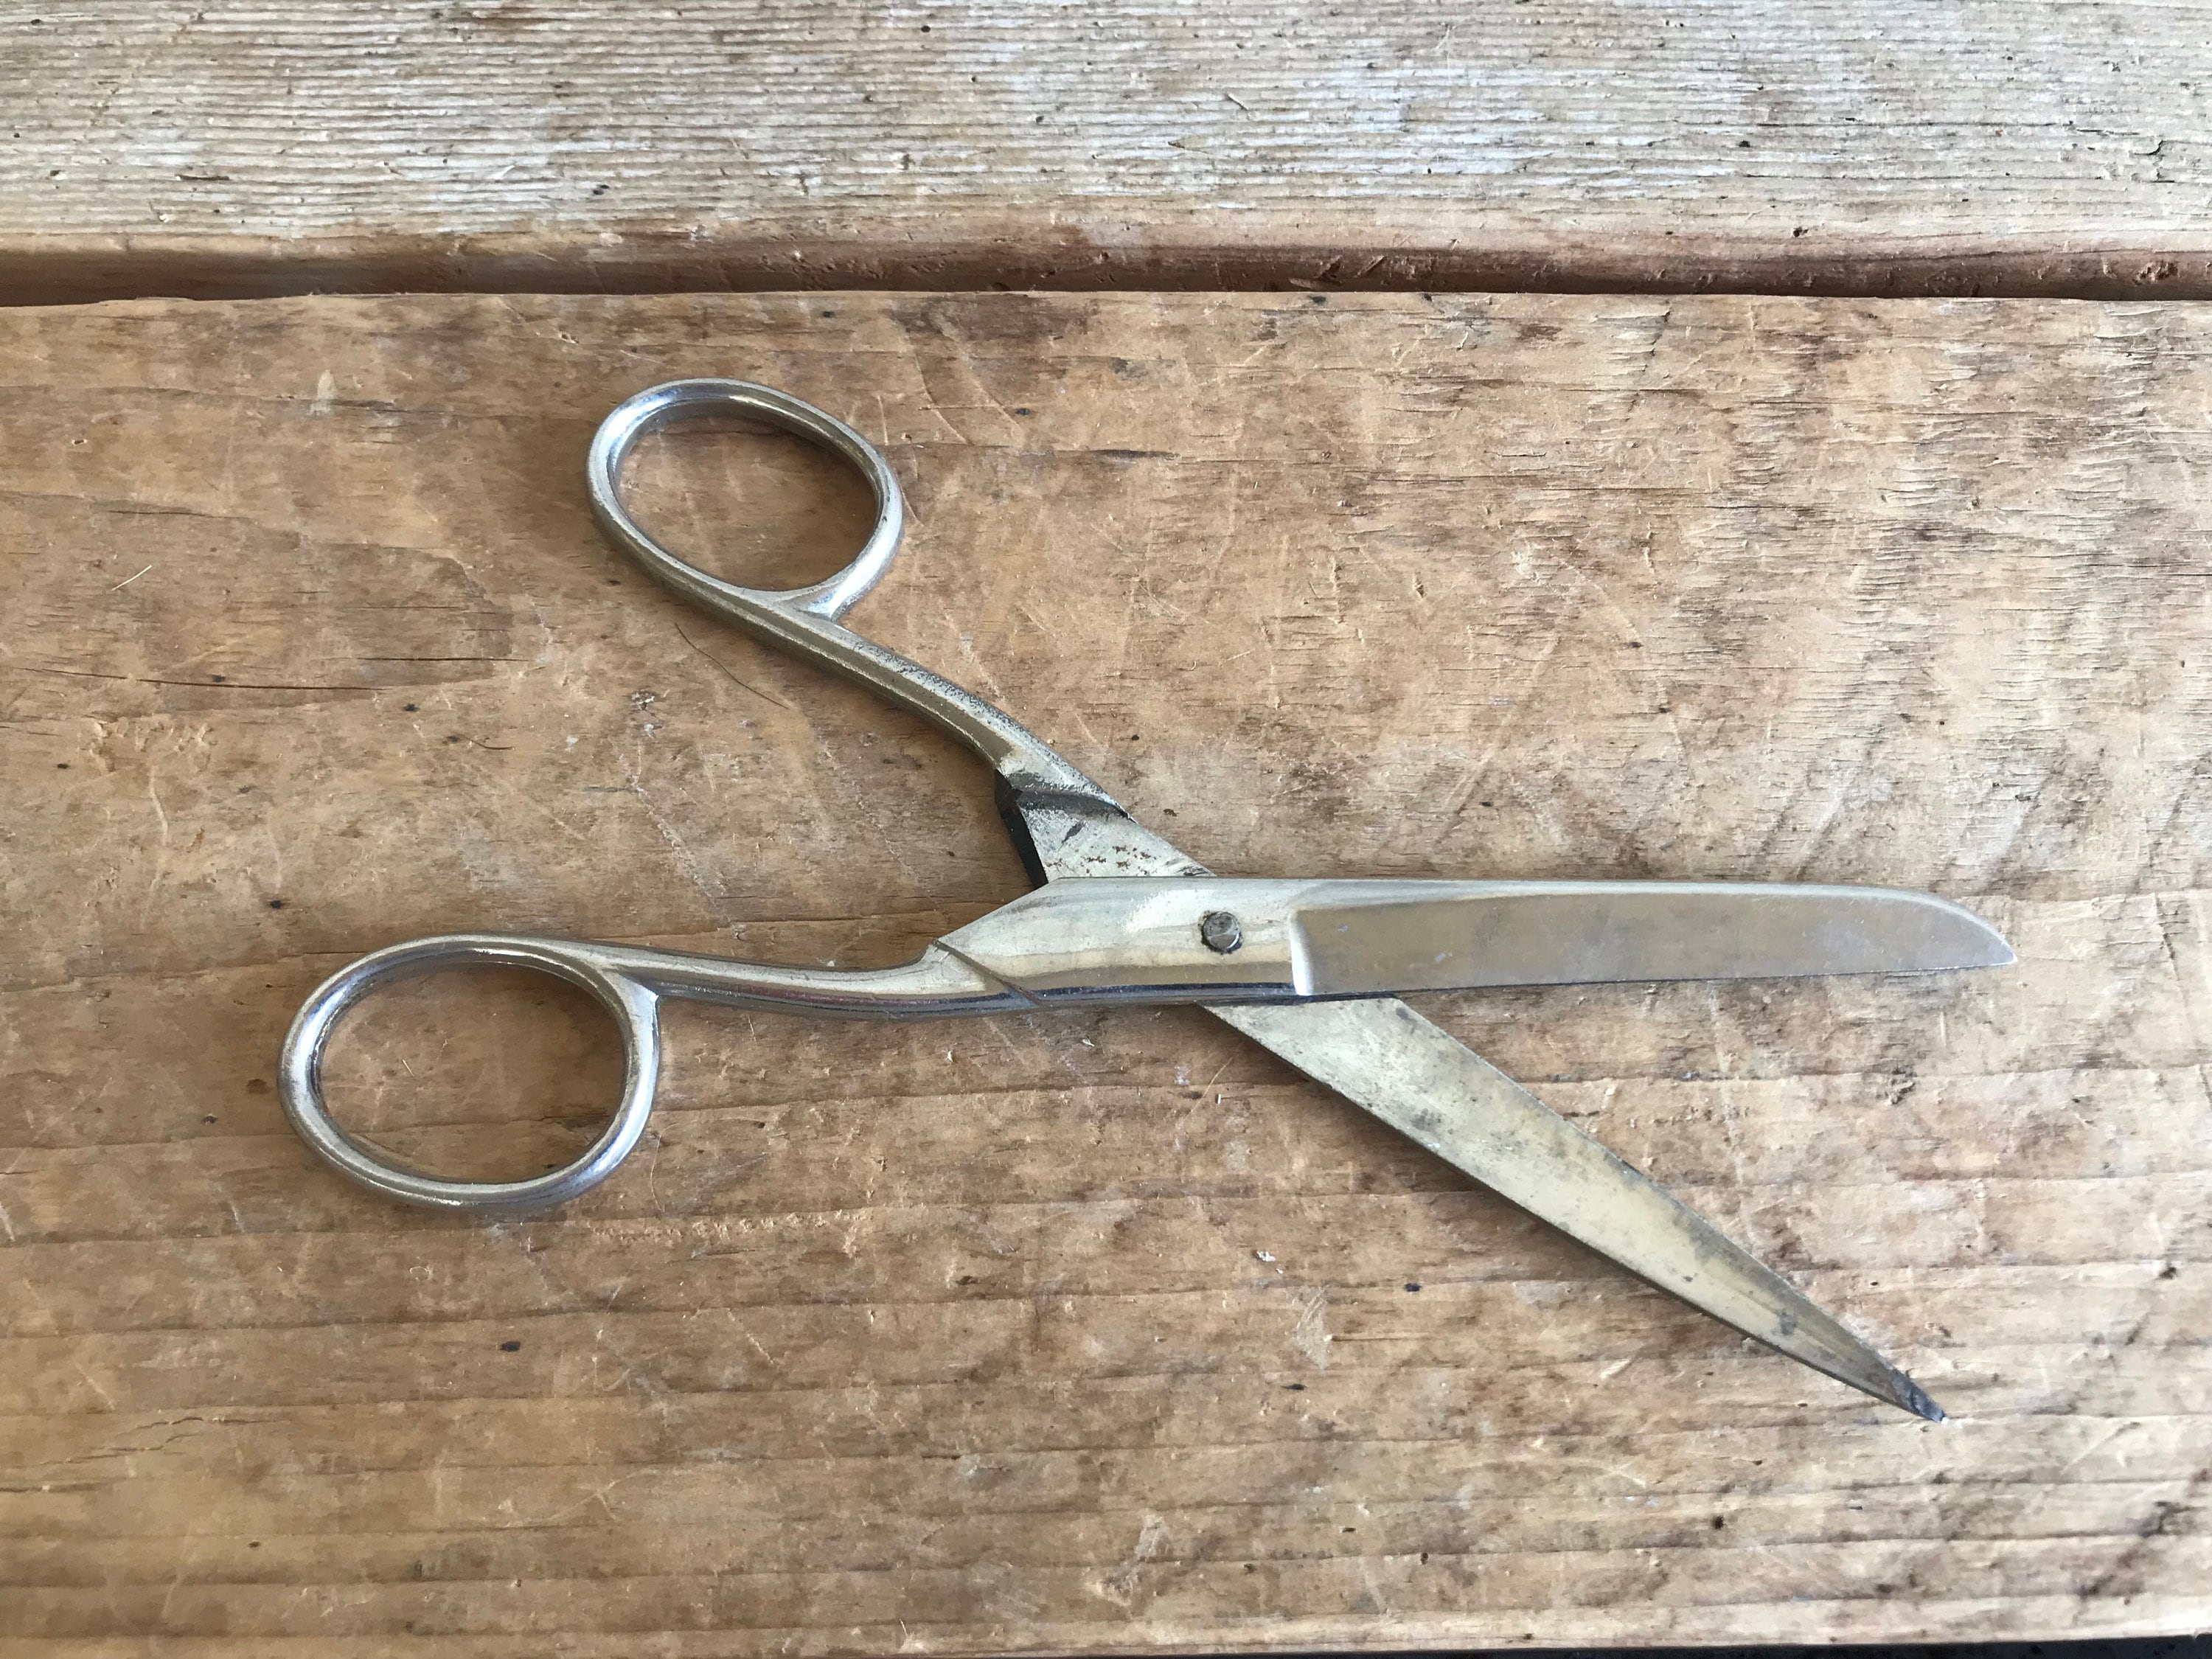 Vintage Remington Large Scissors Shears Made in USA 110 5 Blade